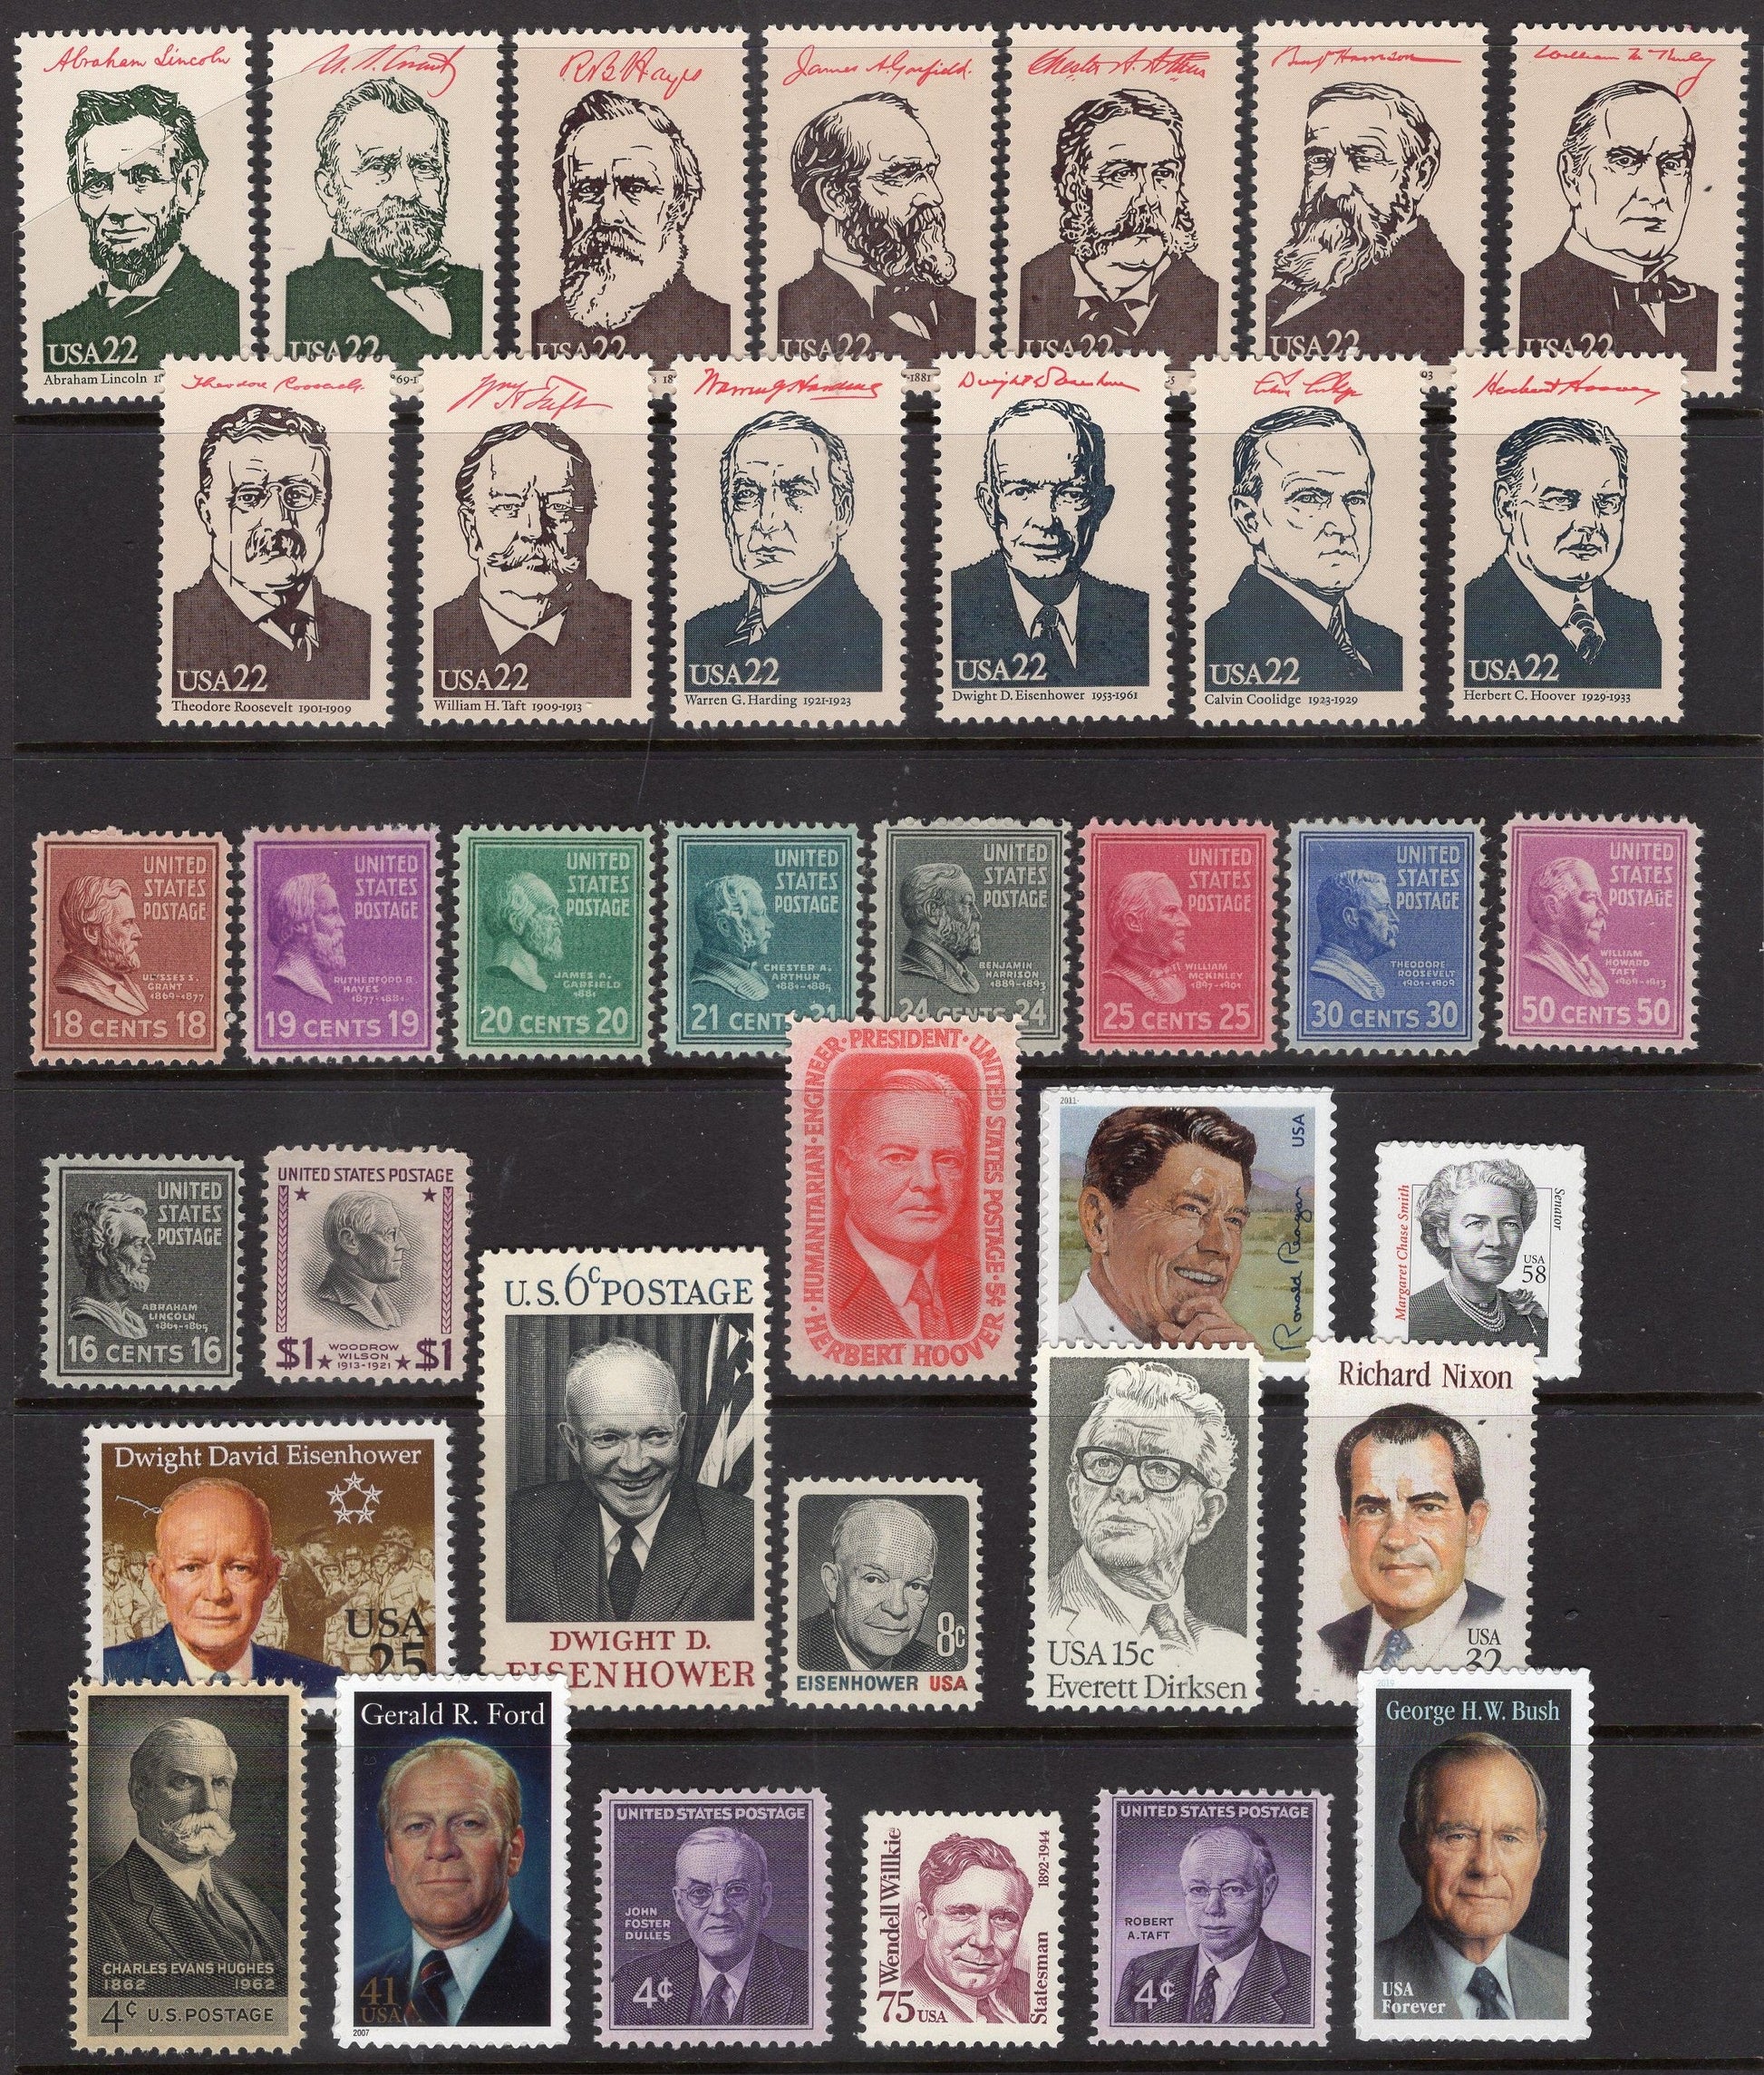 PROMINENT REPUBLICANS LINCOLN to REAGAN 37 Mint Stamps Lincoln Grant Hayes Garfield Arthur B. Harrison McKinley T. Roosevelt W Taft Harding Coolidge Hoover Eisenhower Nixon Ford Reagan G.H.W. Bush Wilkie Dirksen M C Smith Hughes Dulles R Taft 